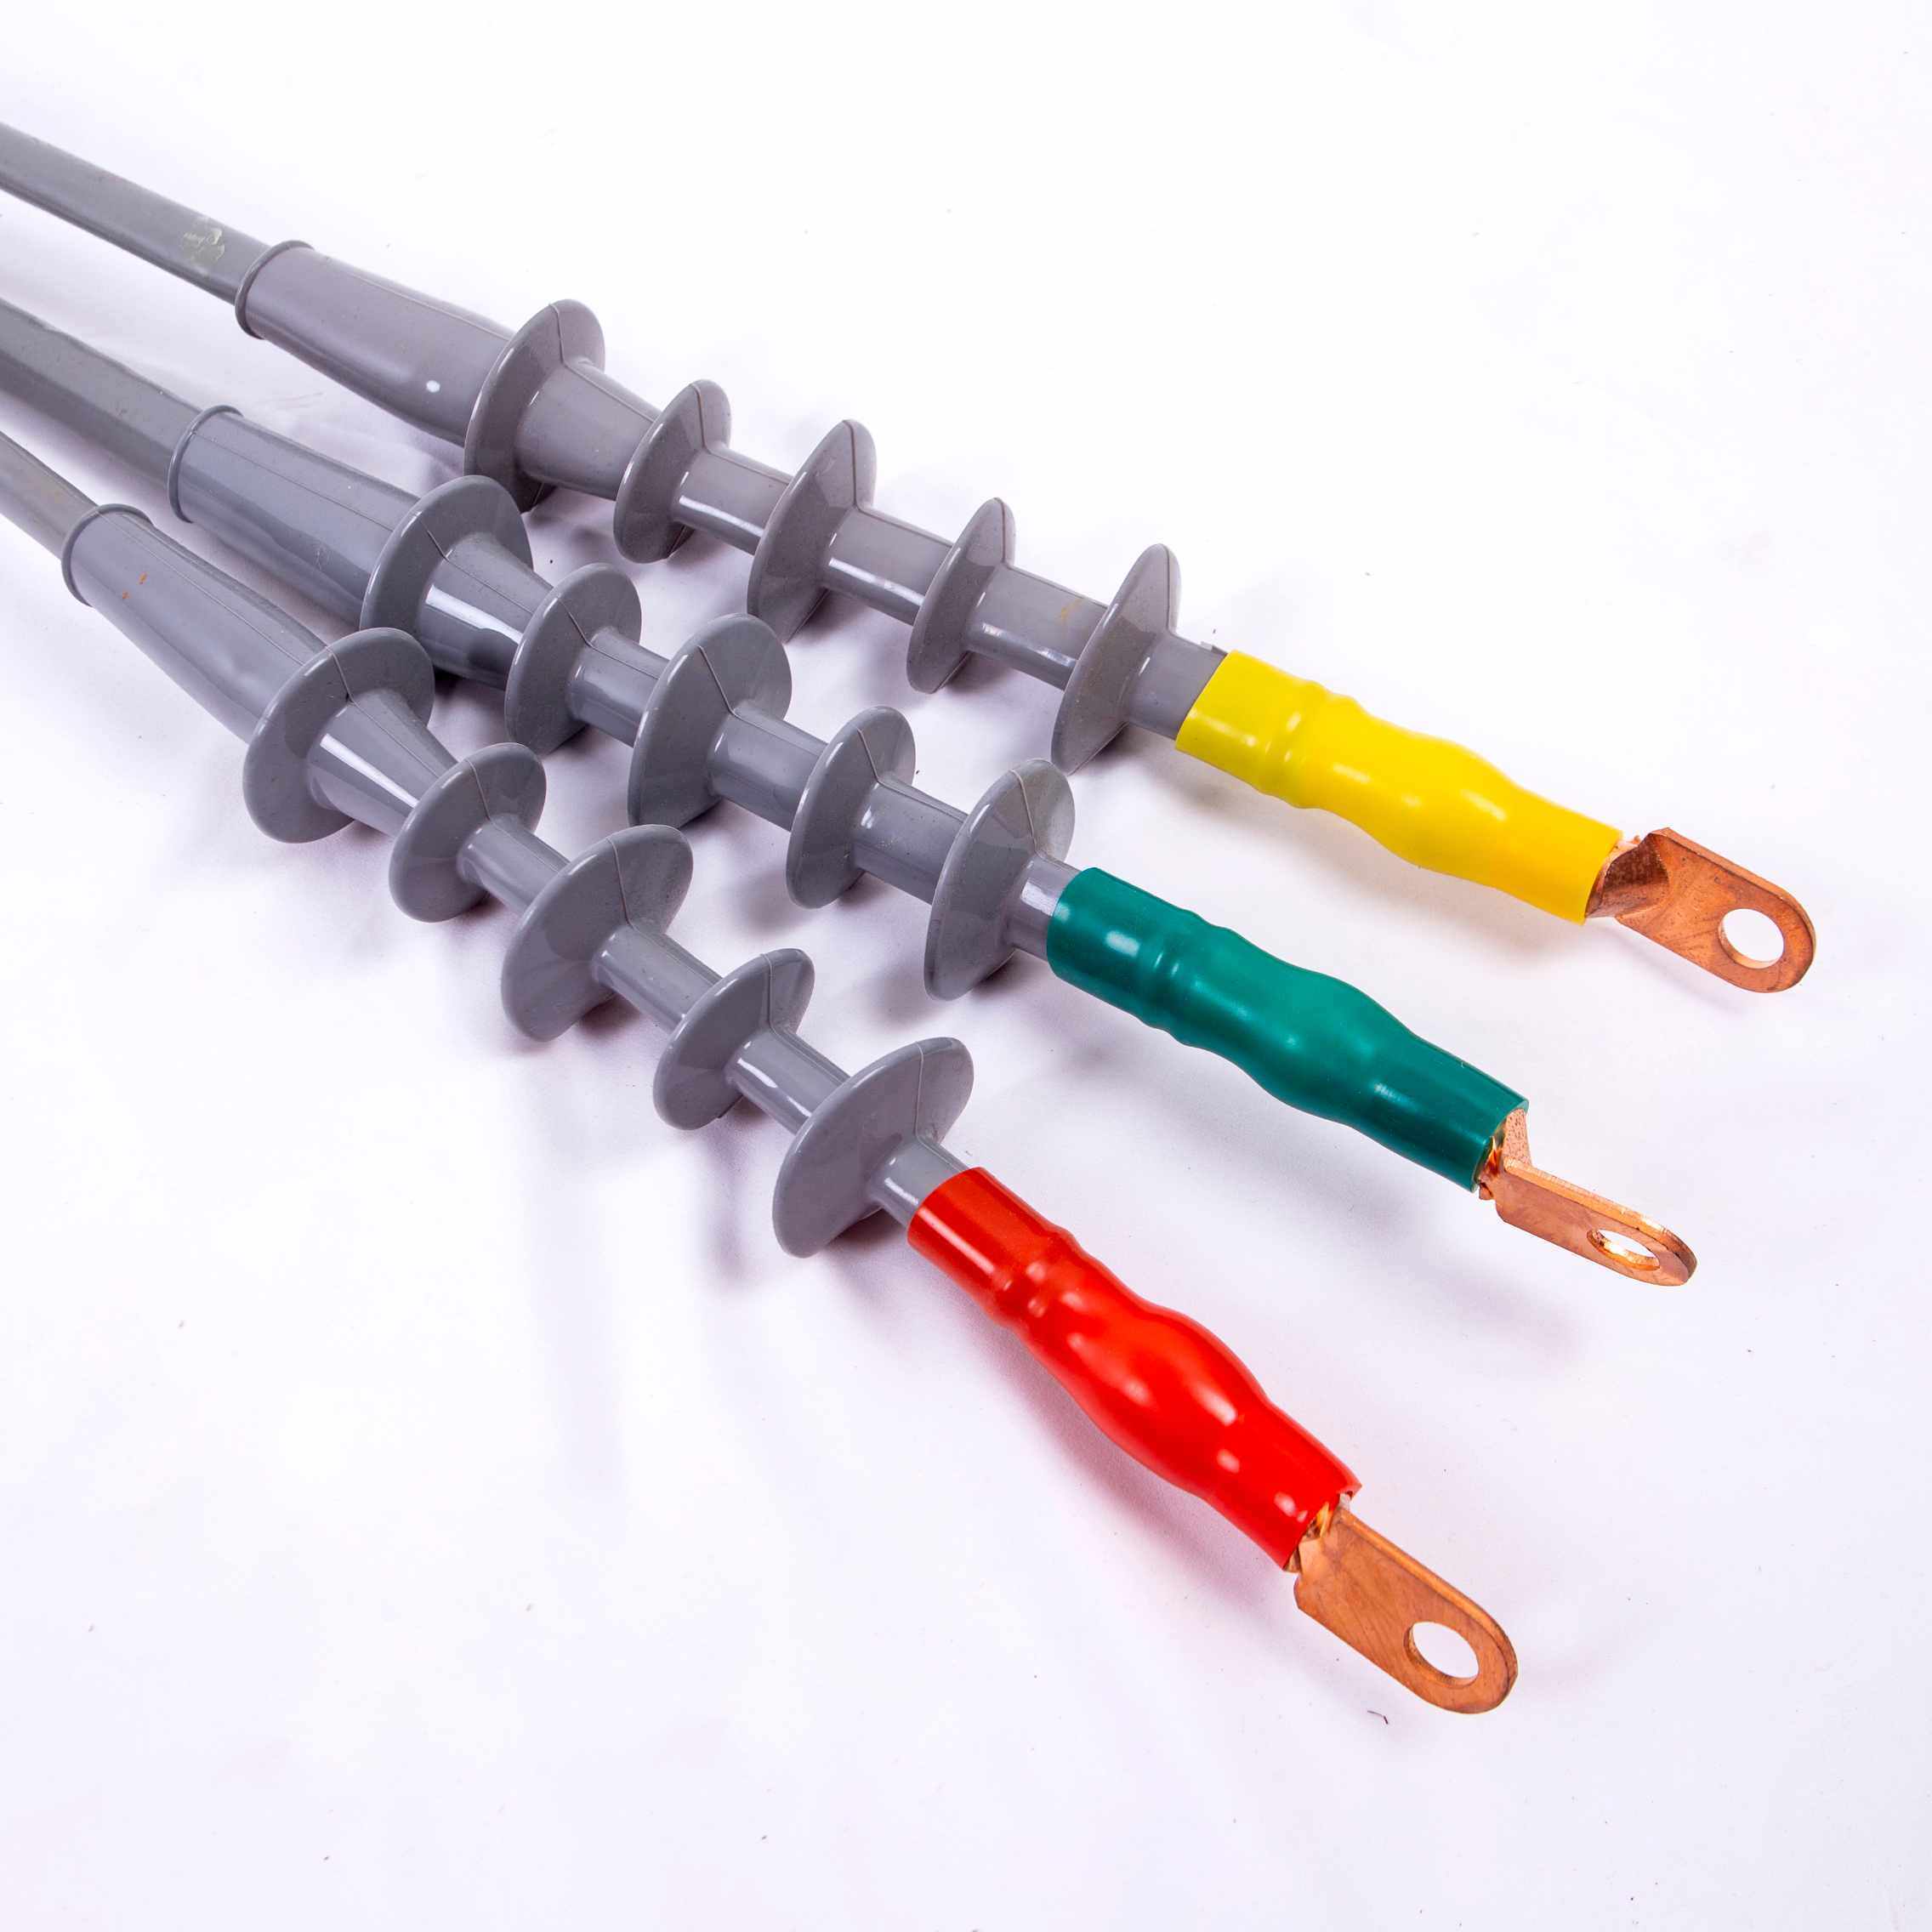 High Quality Cold Shrinkable End Cap for Cable Termination/Cold Shrink Termination Kits/Cold Shrinkable Joints and 3 Core 11kv C